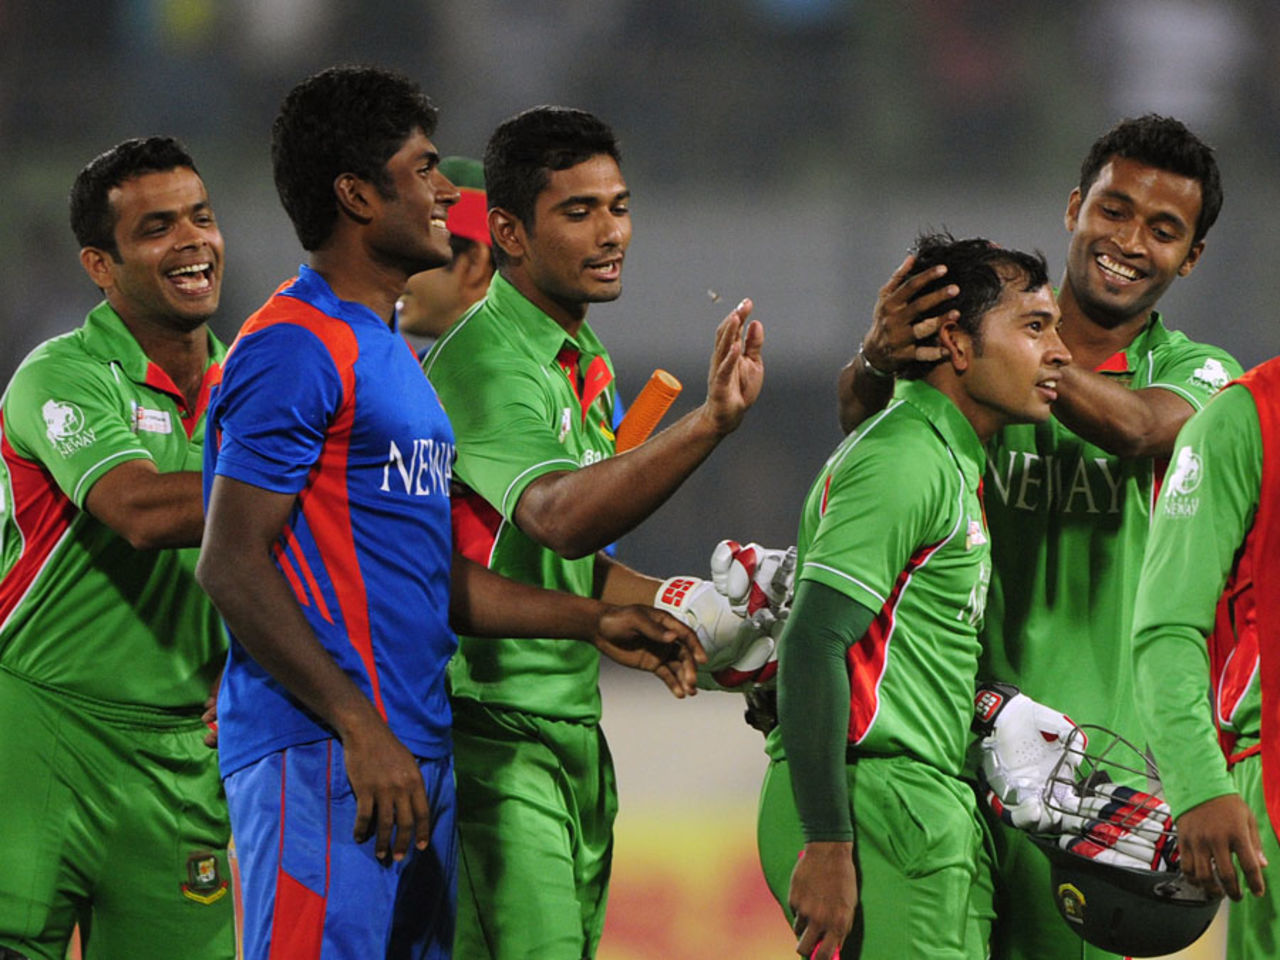 Bangladesh captain Mushfiqur Rahim is surrounded by his players after the win, Bangladesh v India, Asia Cup, Mirpur, March 16, 2012